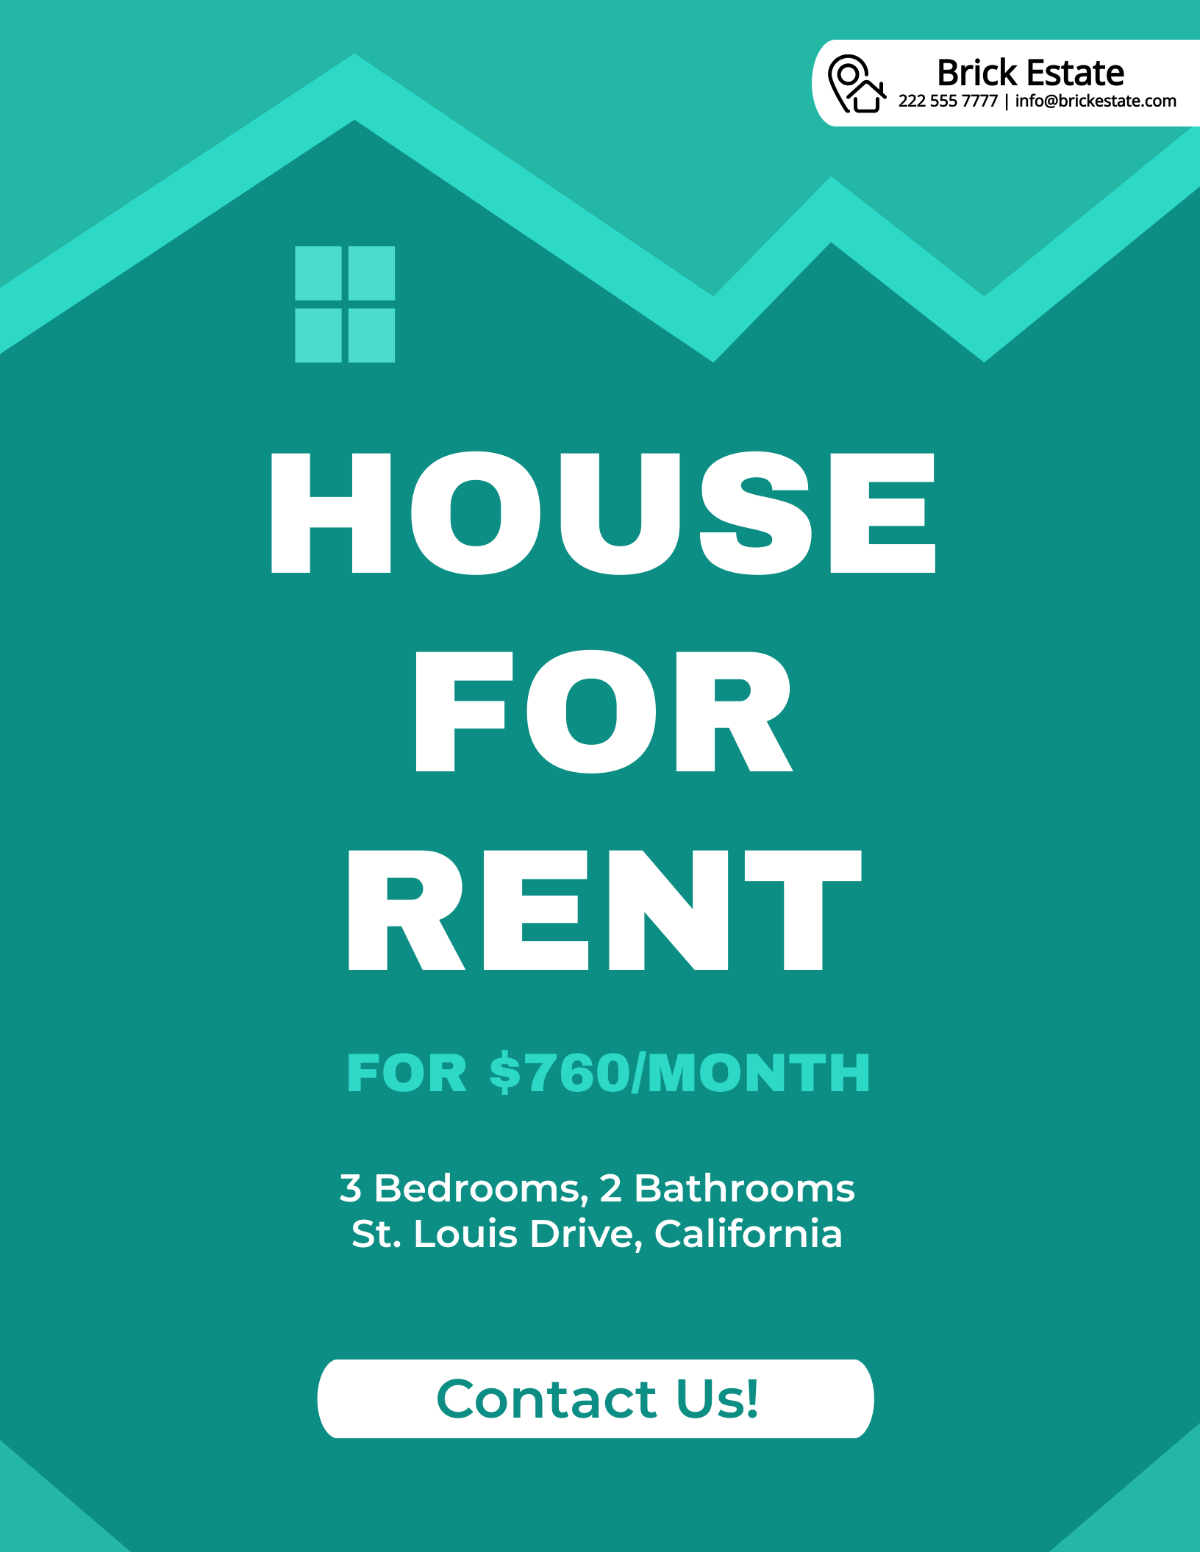 House For Rent Flyer Template